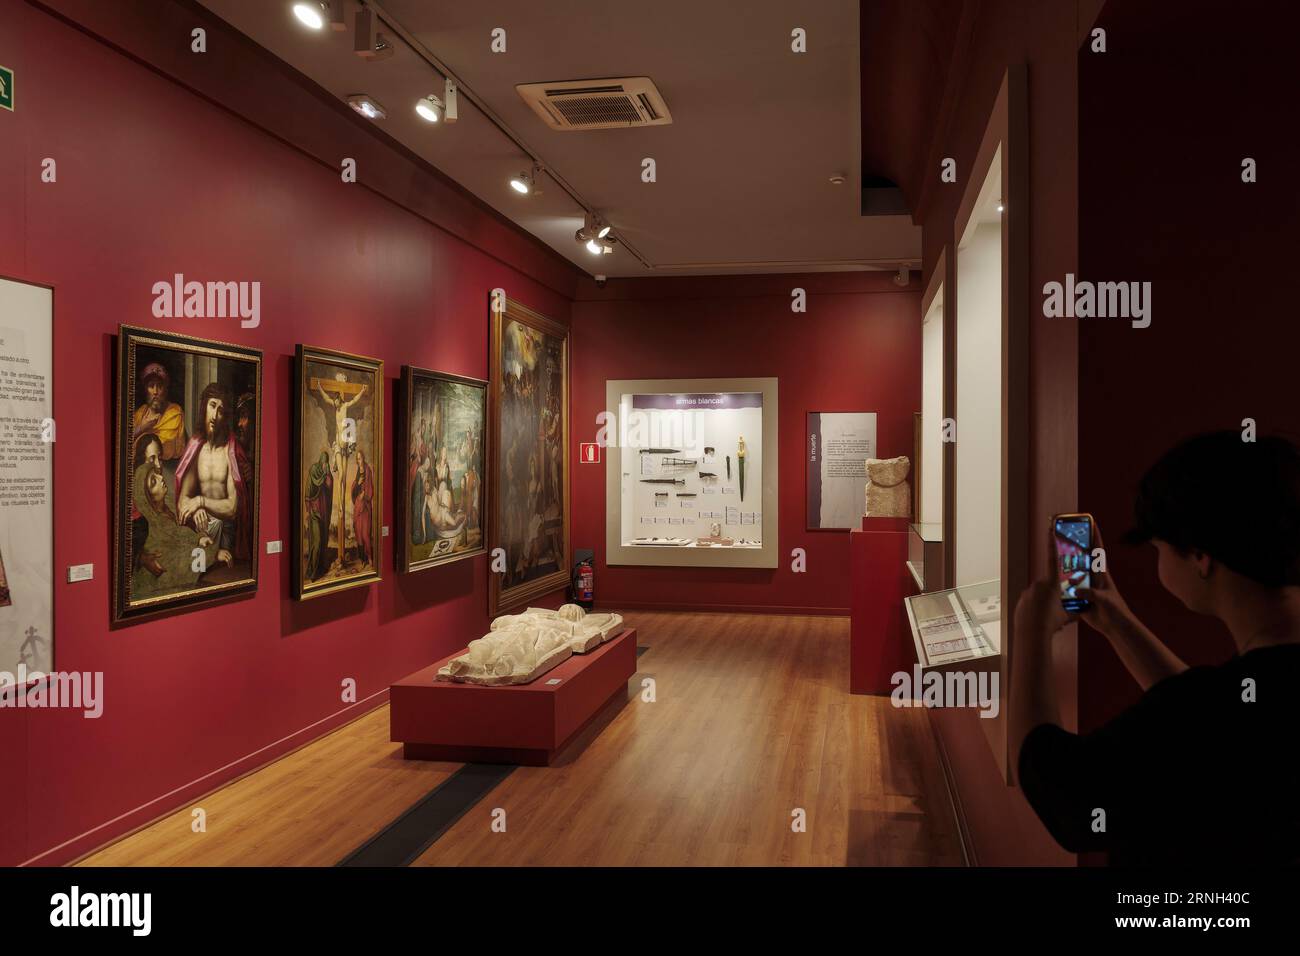 child taking a photo with a mobile phone, smartphone, in a room of the provincial museum, Palacio del Infantado, in the city of Guadalajara, Spain. Stock Photo